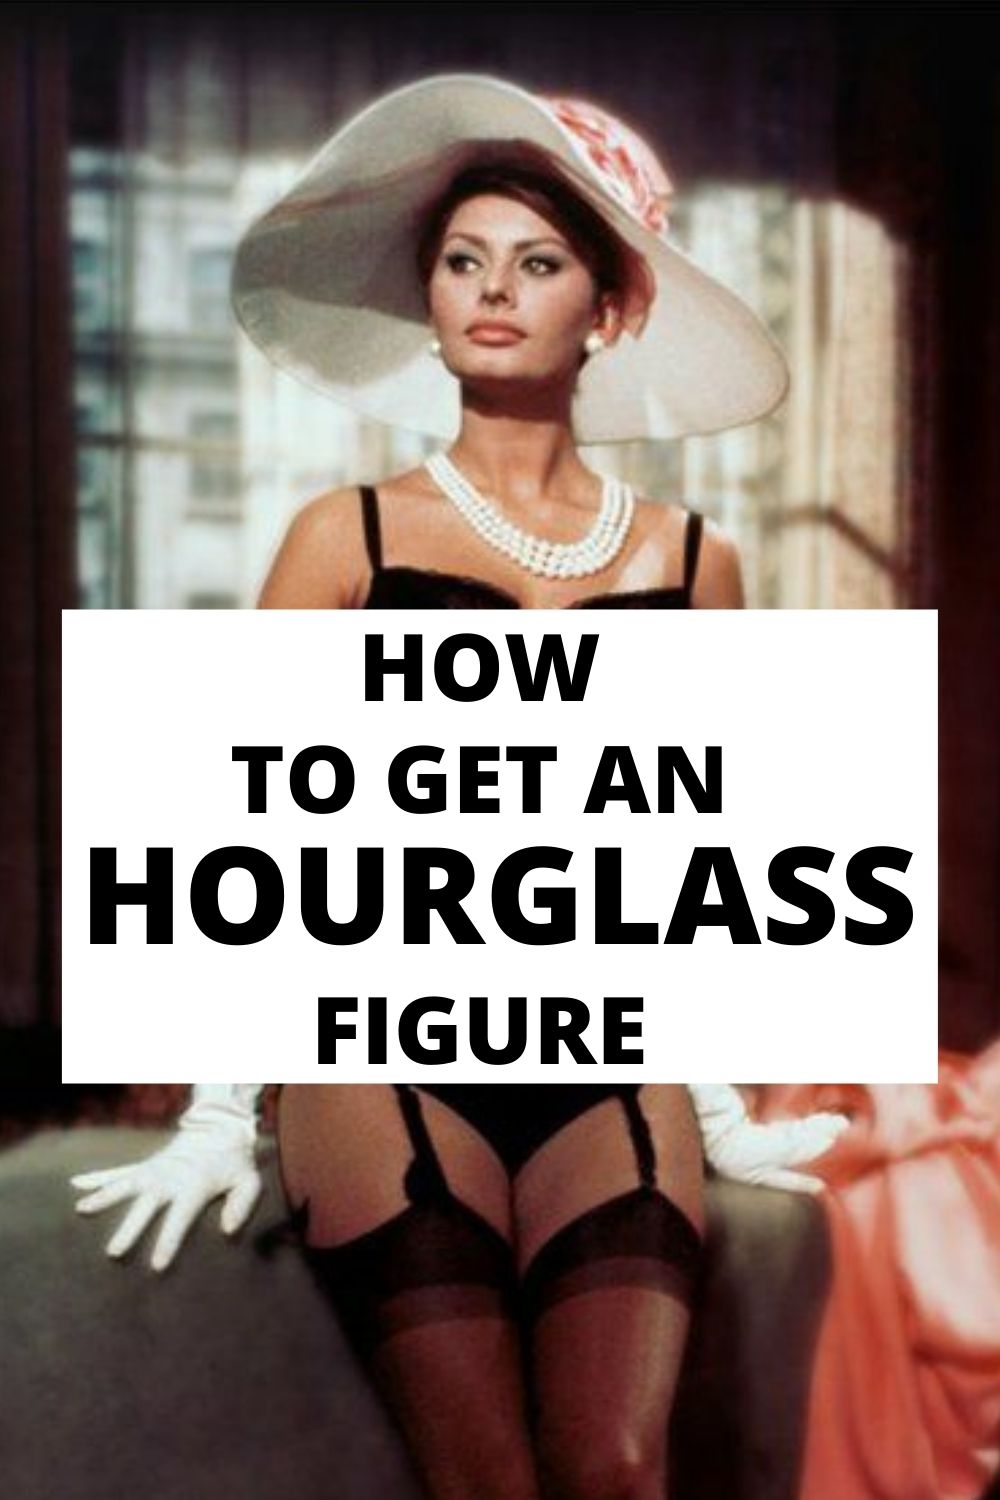 How to get an hourglass figure